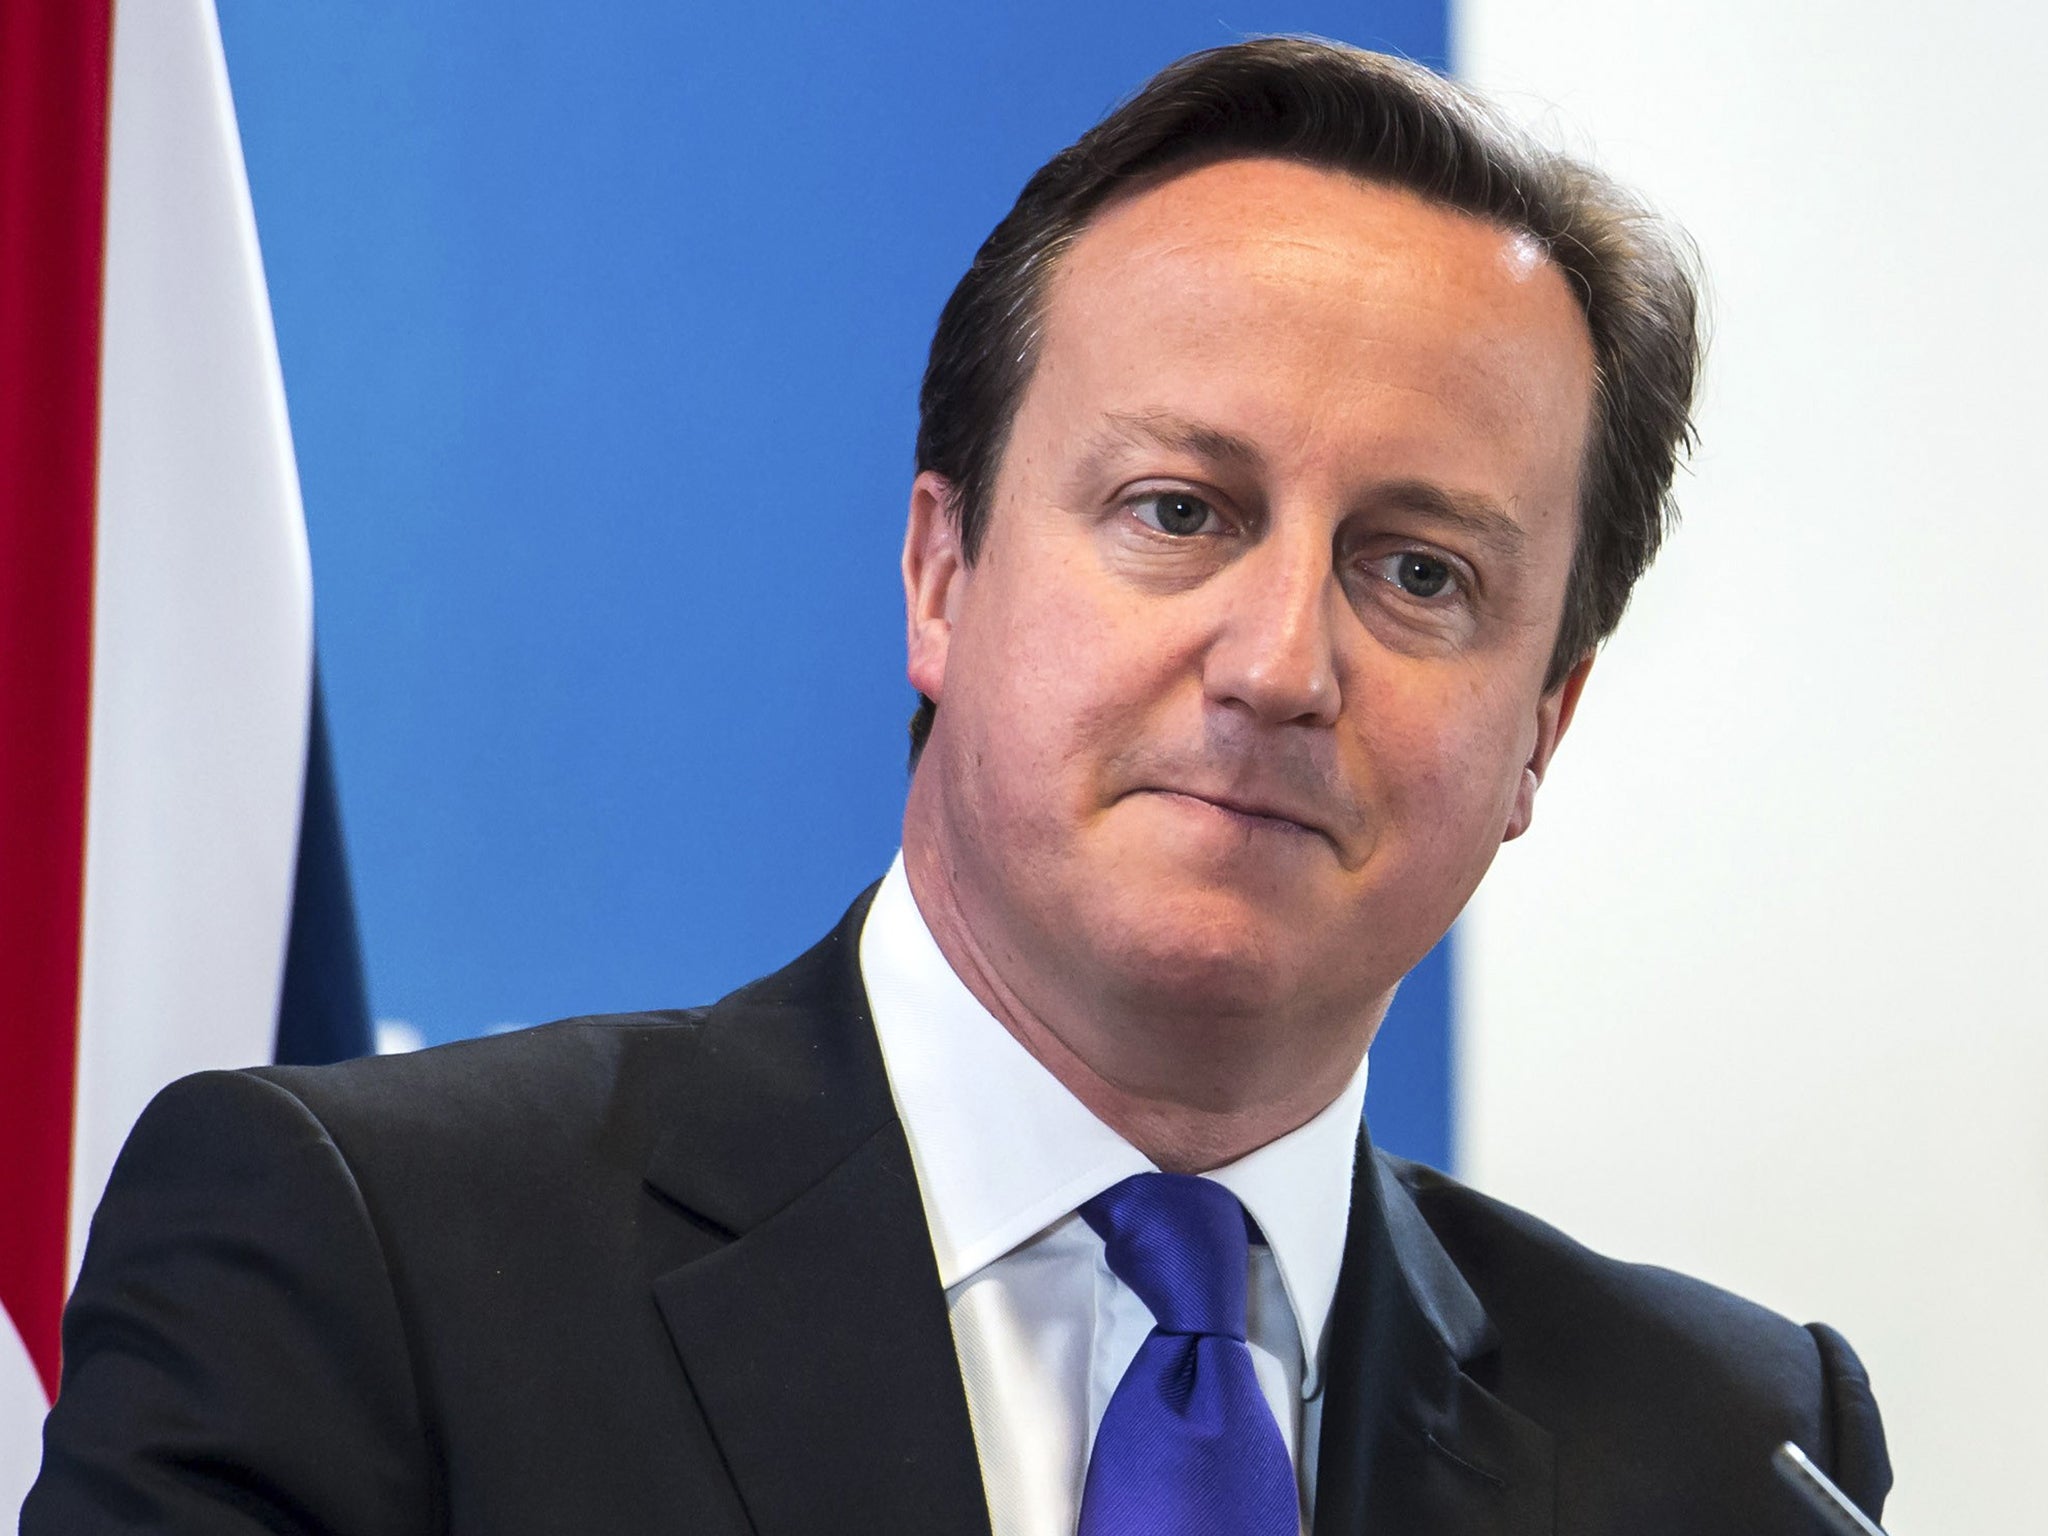 David Cameron does not want the debates to dominate the campaign at next May’s election